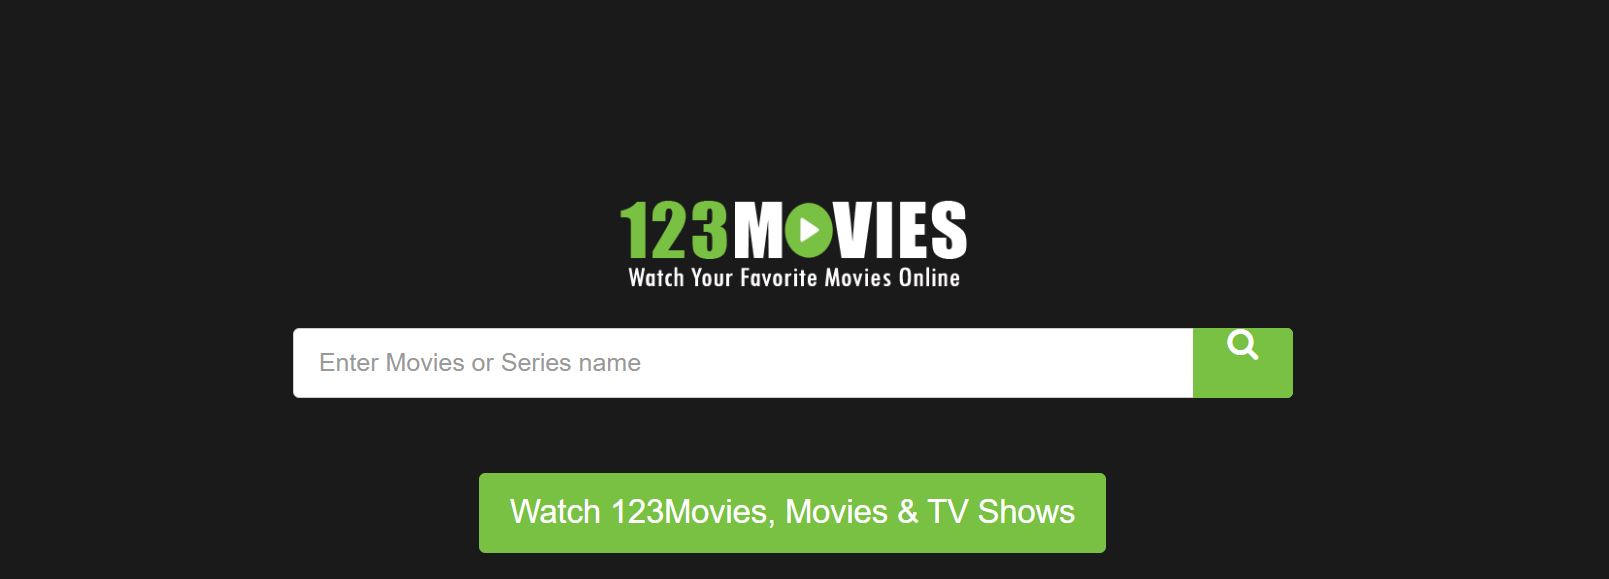 What are the advantages of watching movie websites?